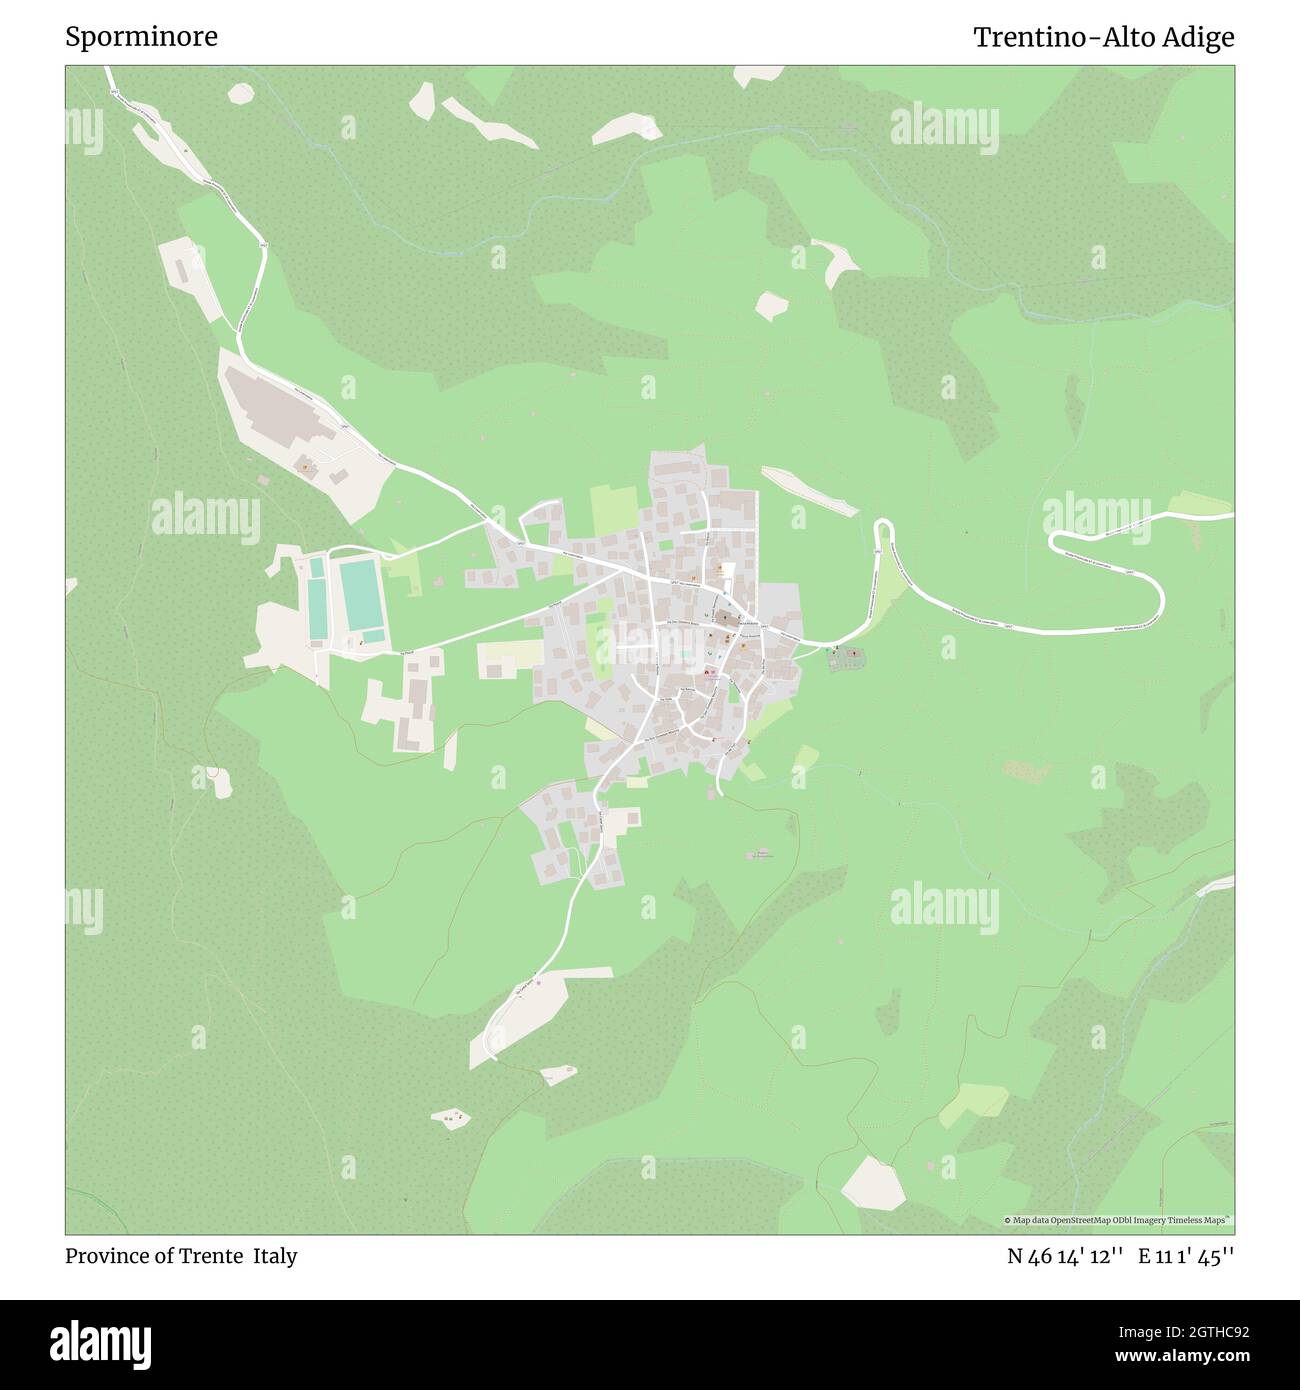 Sporminore, Province of Trente, Italy, Trentino-Alto Adige, N 46 14' 12'', E 11 1' 45'', map, Timeless Map published in 2021. Travelers, explorers and adventurers like Florence Nightingale, David Livingstone, Ernest Shackleton, Lewis and Clark and Sherlock Holmes relied on maps to plan travels to the world's most remote corners, Timeless Maps is mapping most locations on the globe, showing the achievement of great dreams Stock Photo